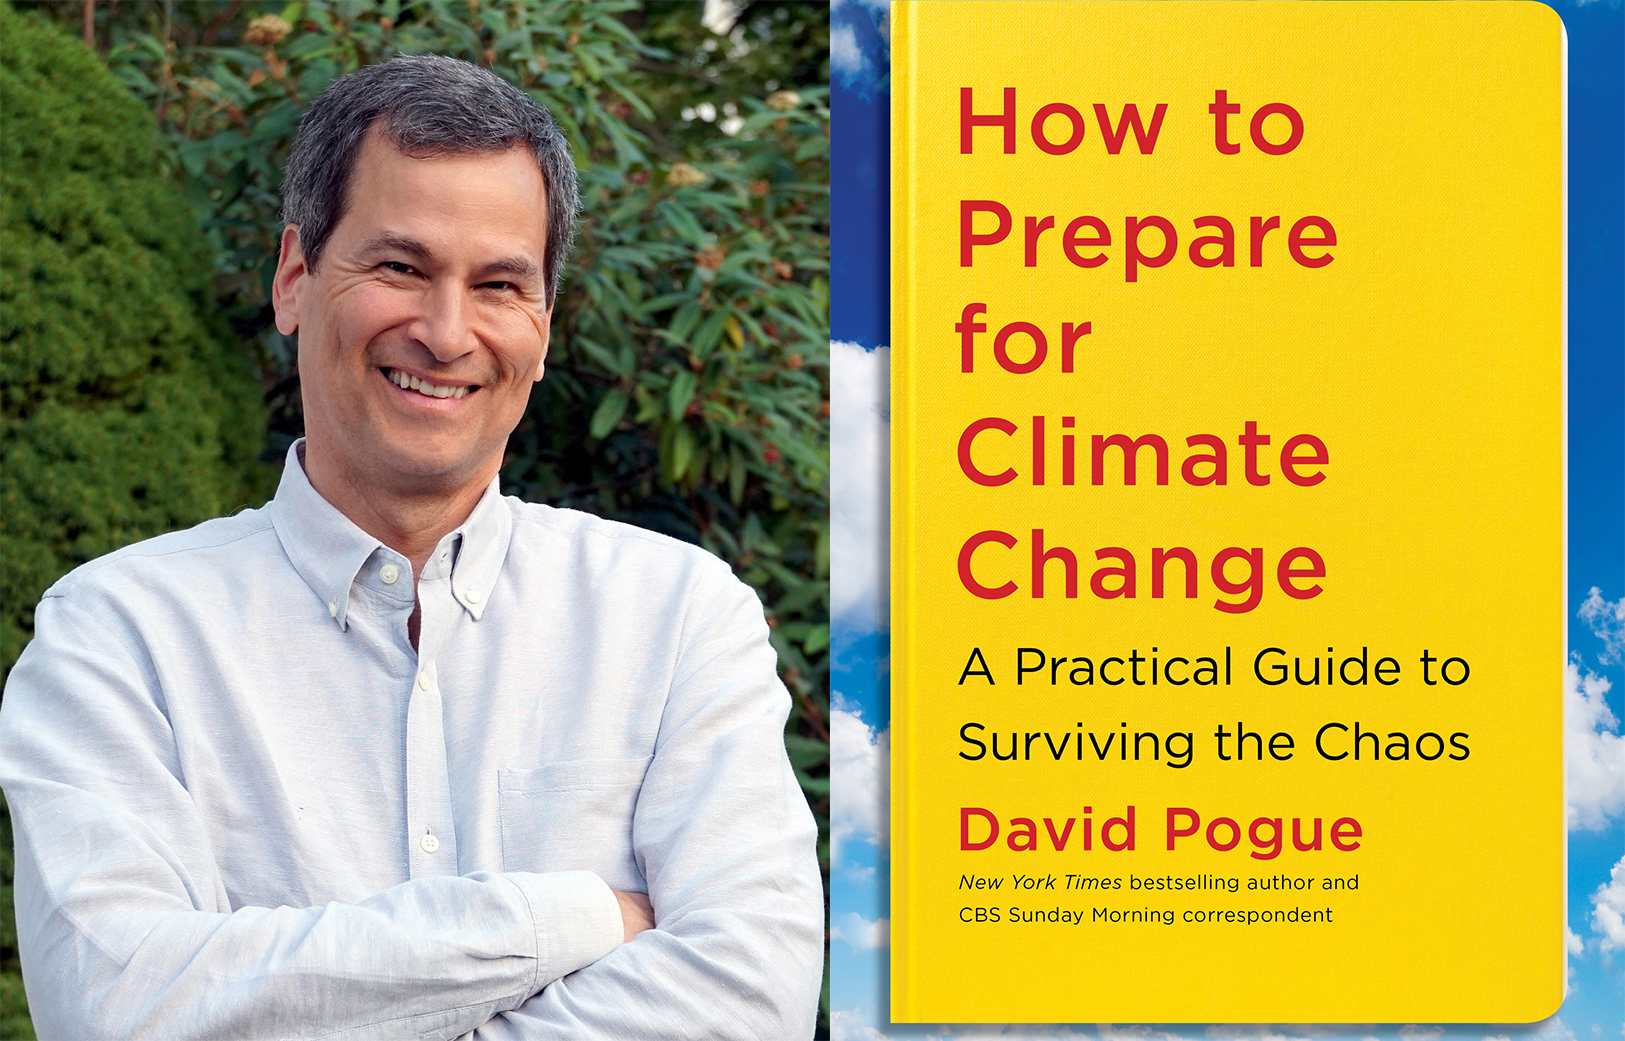 Bestselling Author David Pogue Speaks on Latest Book, How to Prepare for Climate Change: A Practical Guide to Surviving the Chaos, Via Webinar from New Canaan Library